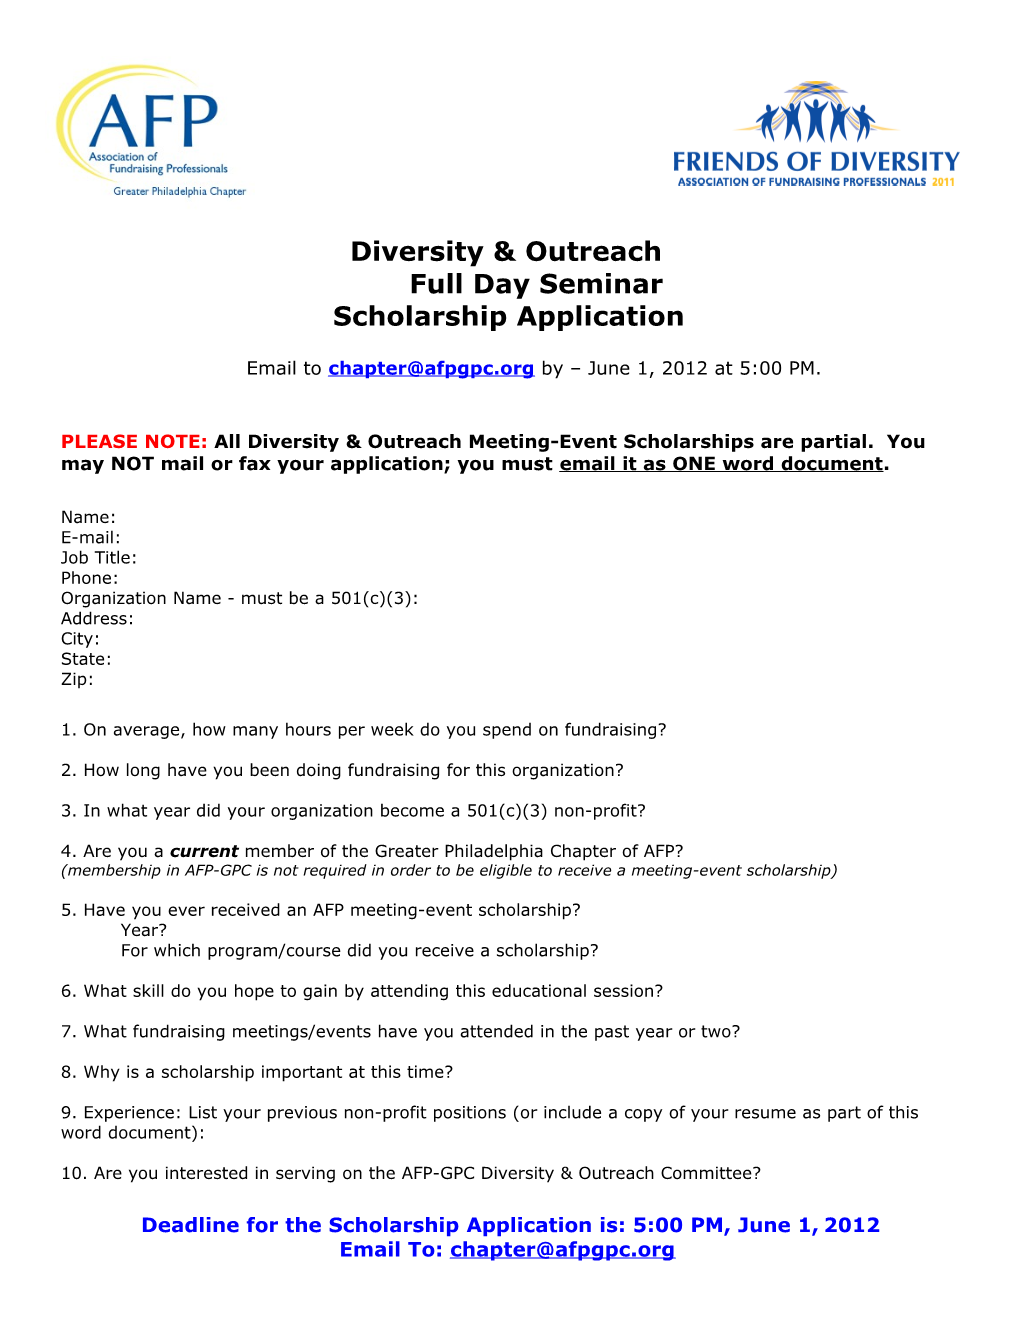 Diversity & Outreach Full Day Seminarscholarship Application Email to by June 1, 2012 At